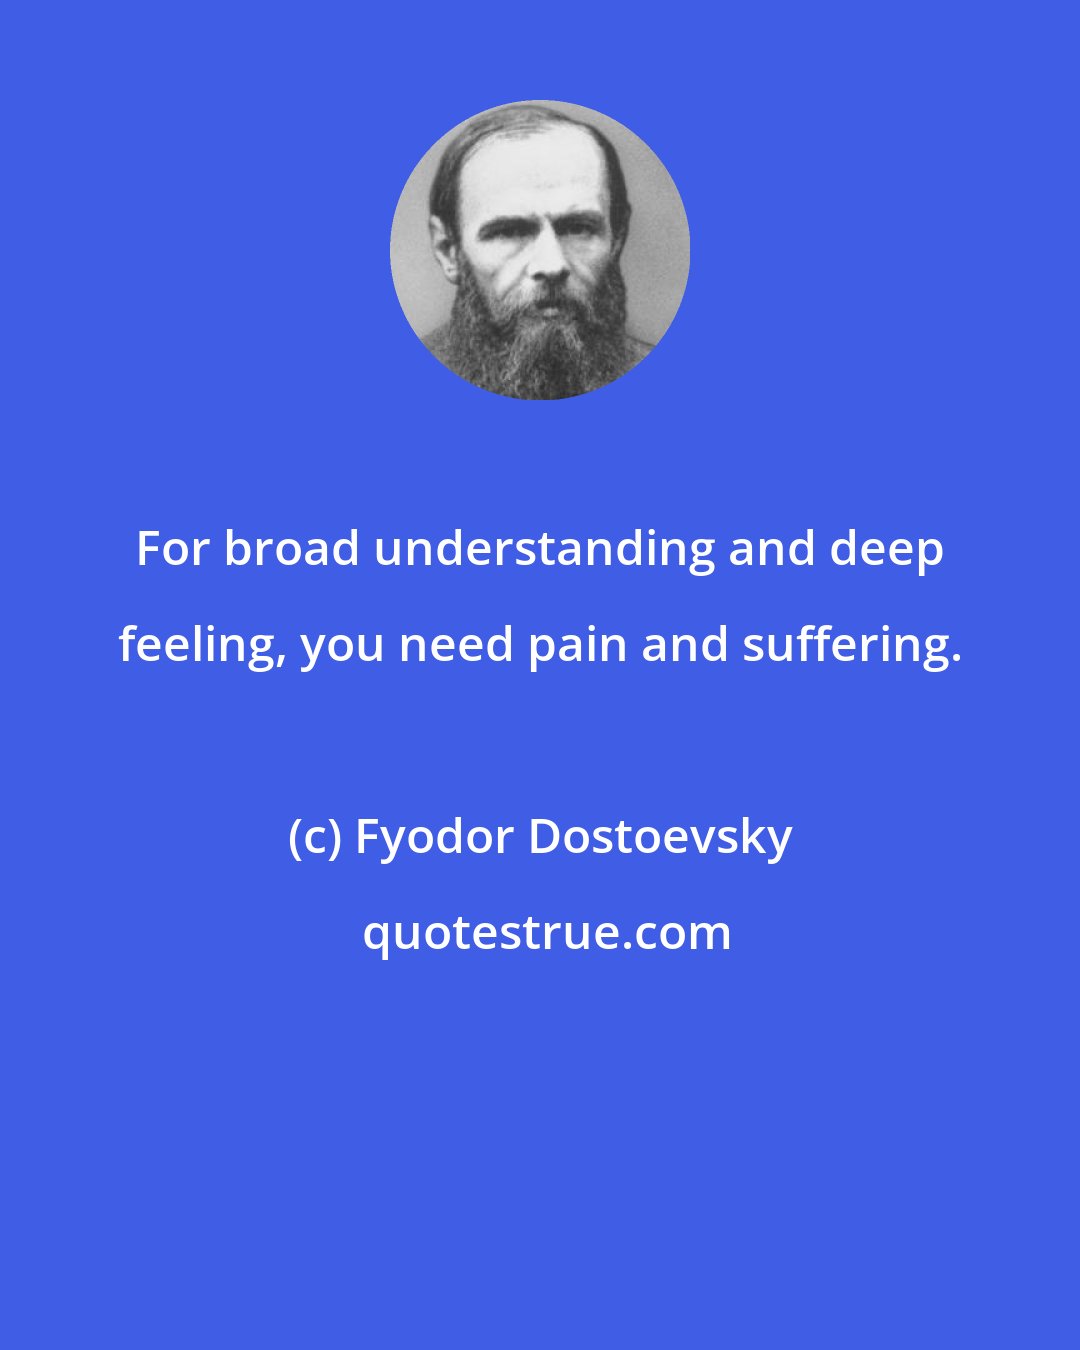 Fyodor Dostoevsky: For broad understanding and deep feeling, you need pain and suffering.